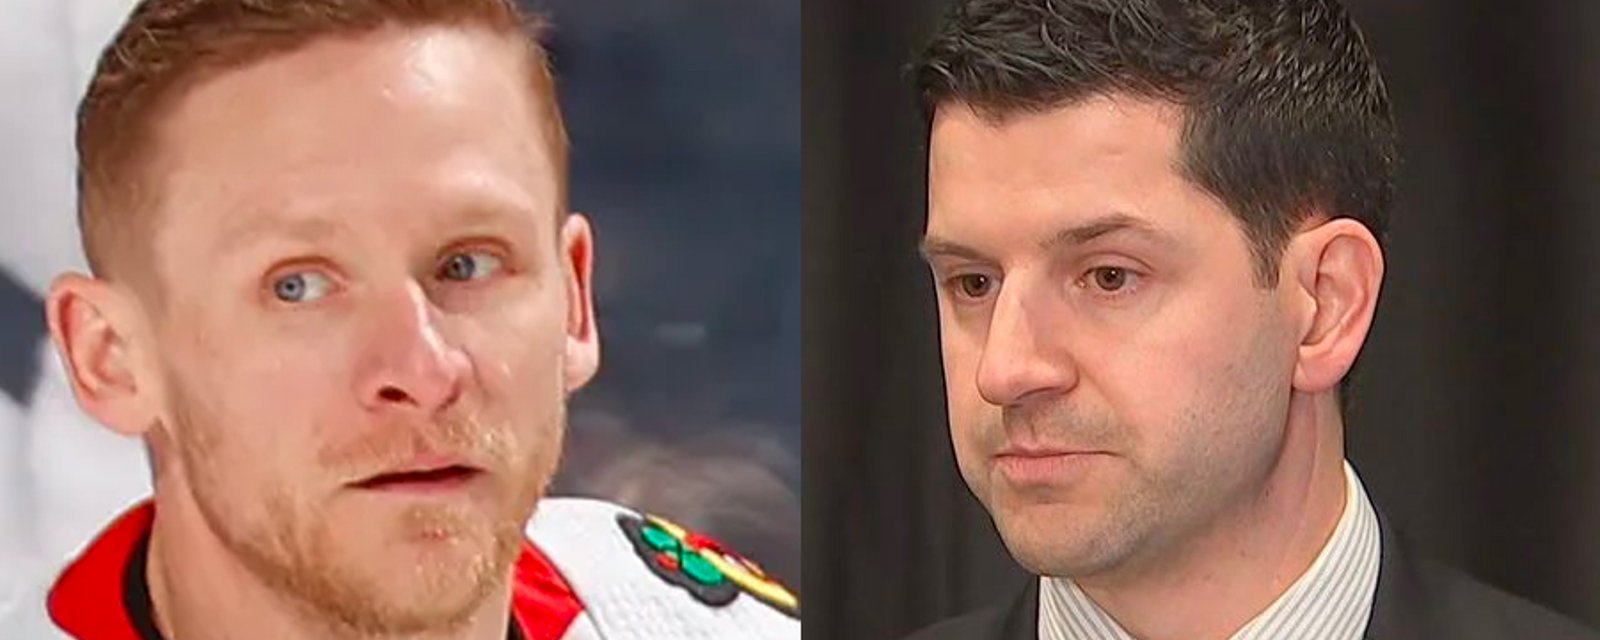 Blackhawks have good reason to withhold key details of the Corey Perry incident